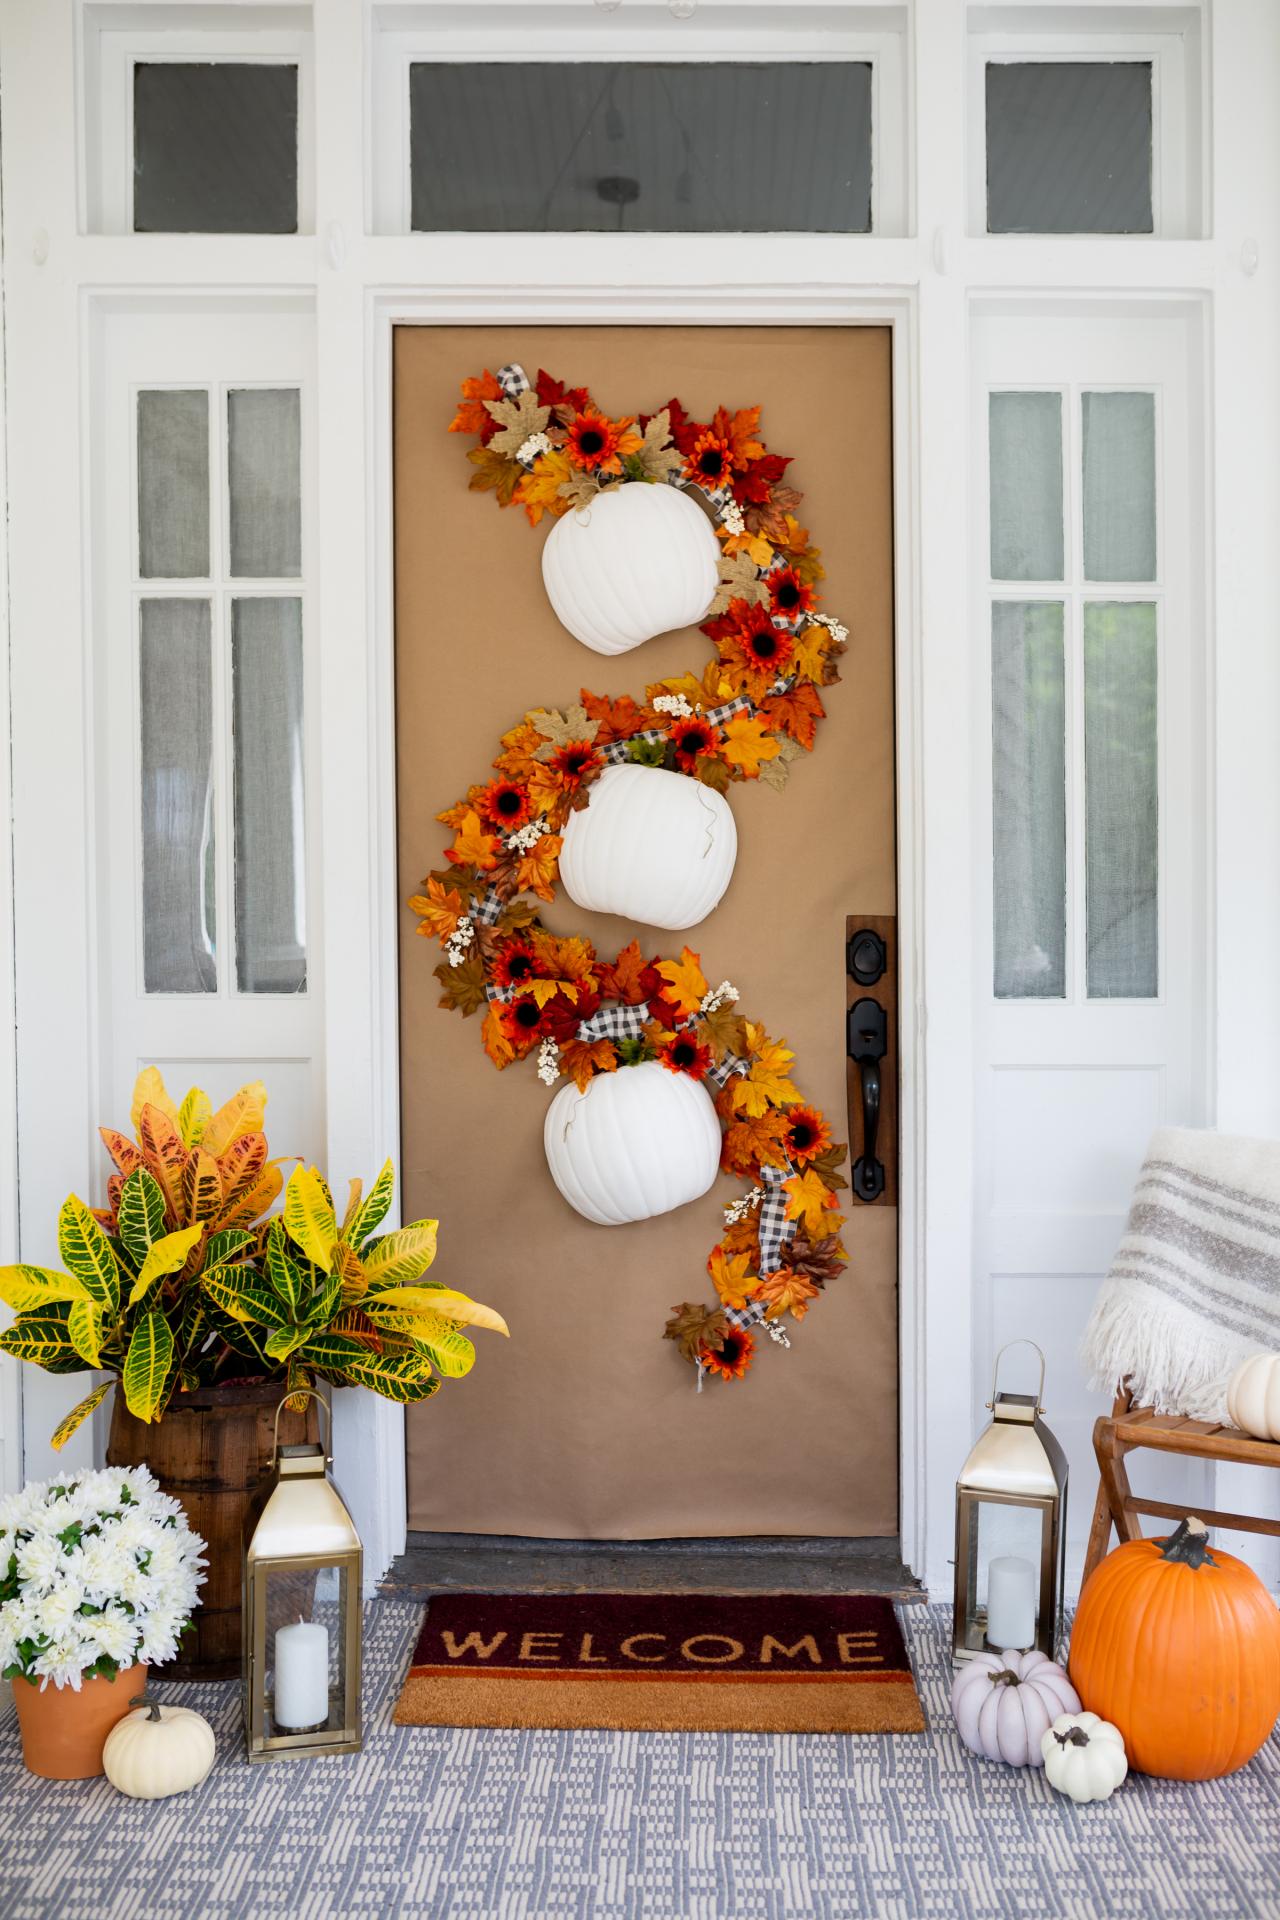 Replacing the Front Door & Decorating for Fall - Room for Tuesday